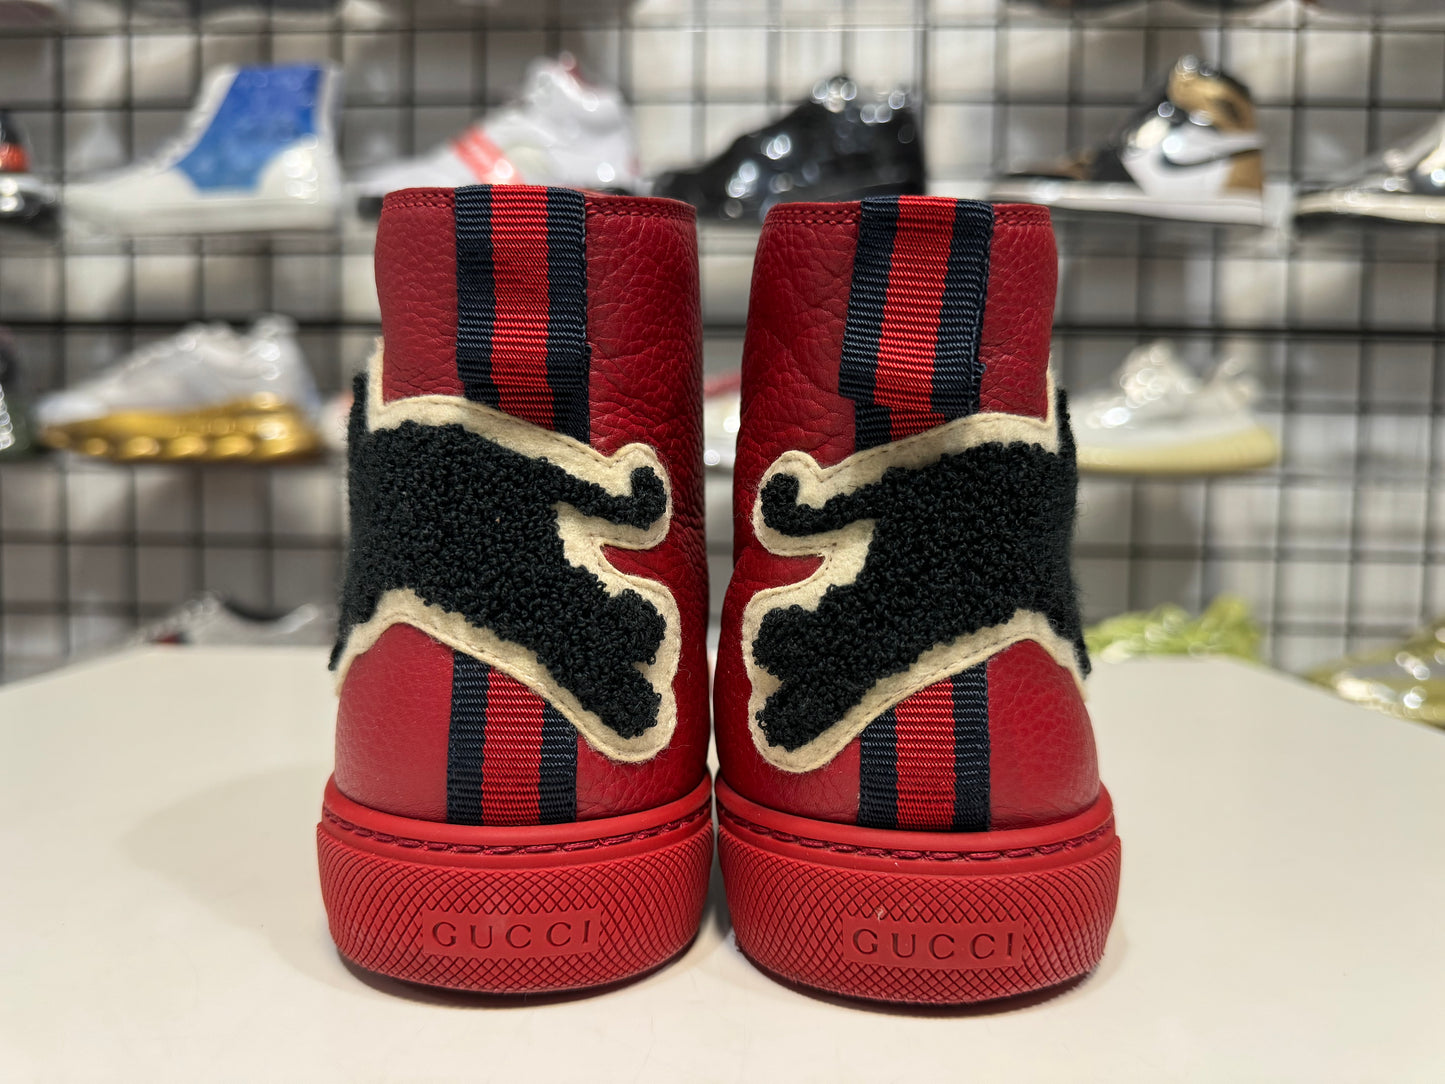 Gucci Panter Leather High Top Sneaker size 7.5G